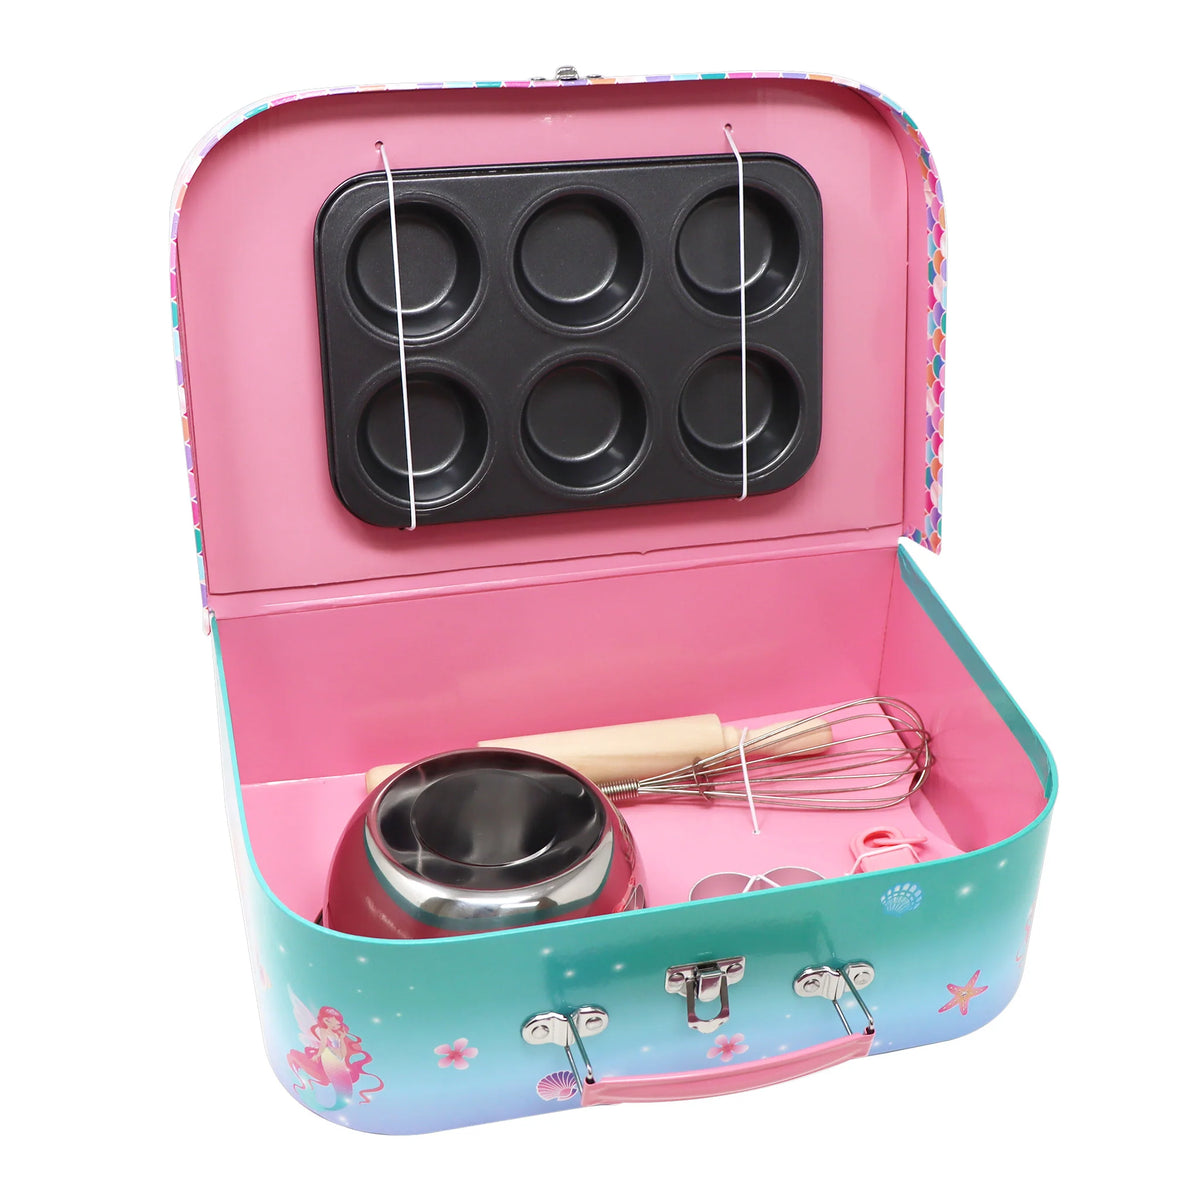 Moulin Roty Play Toy Baking Set Patisserie in Suitcase